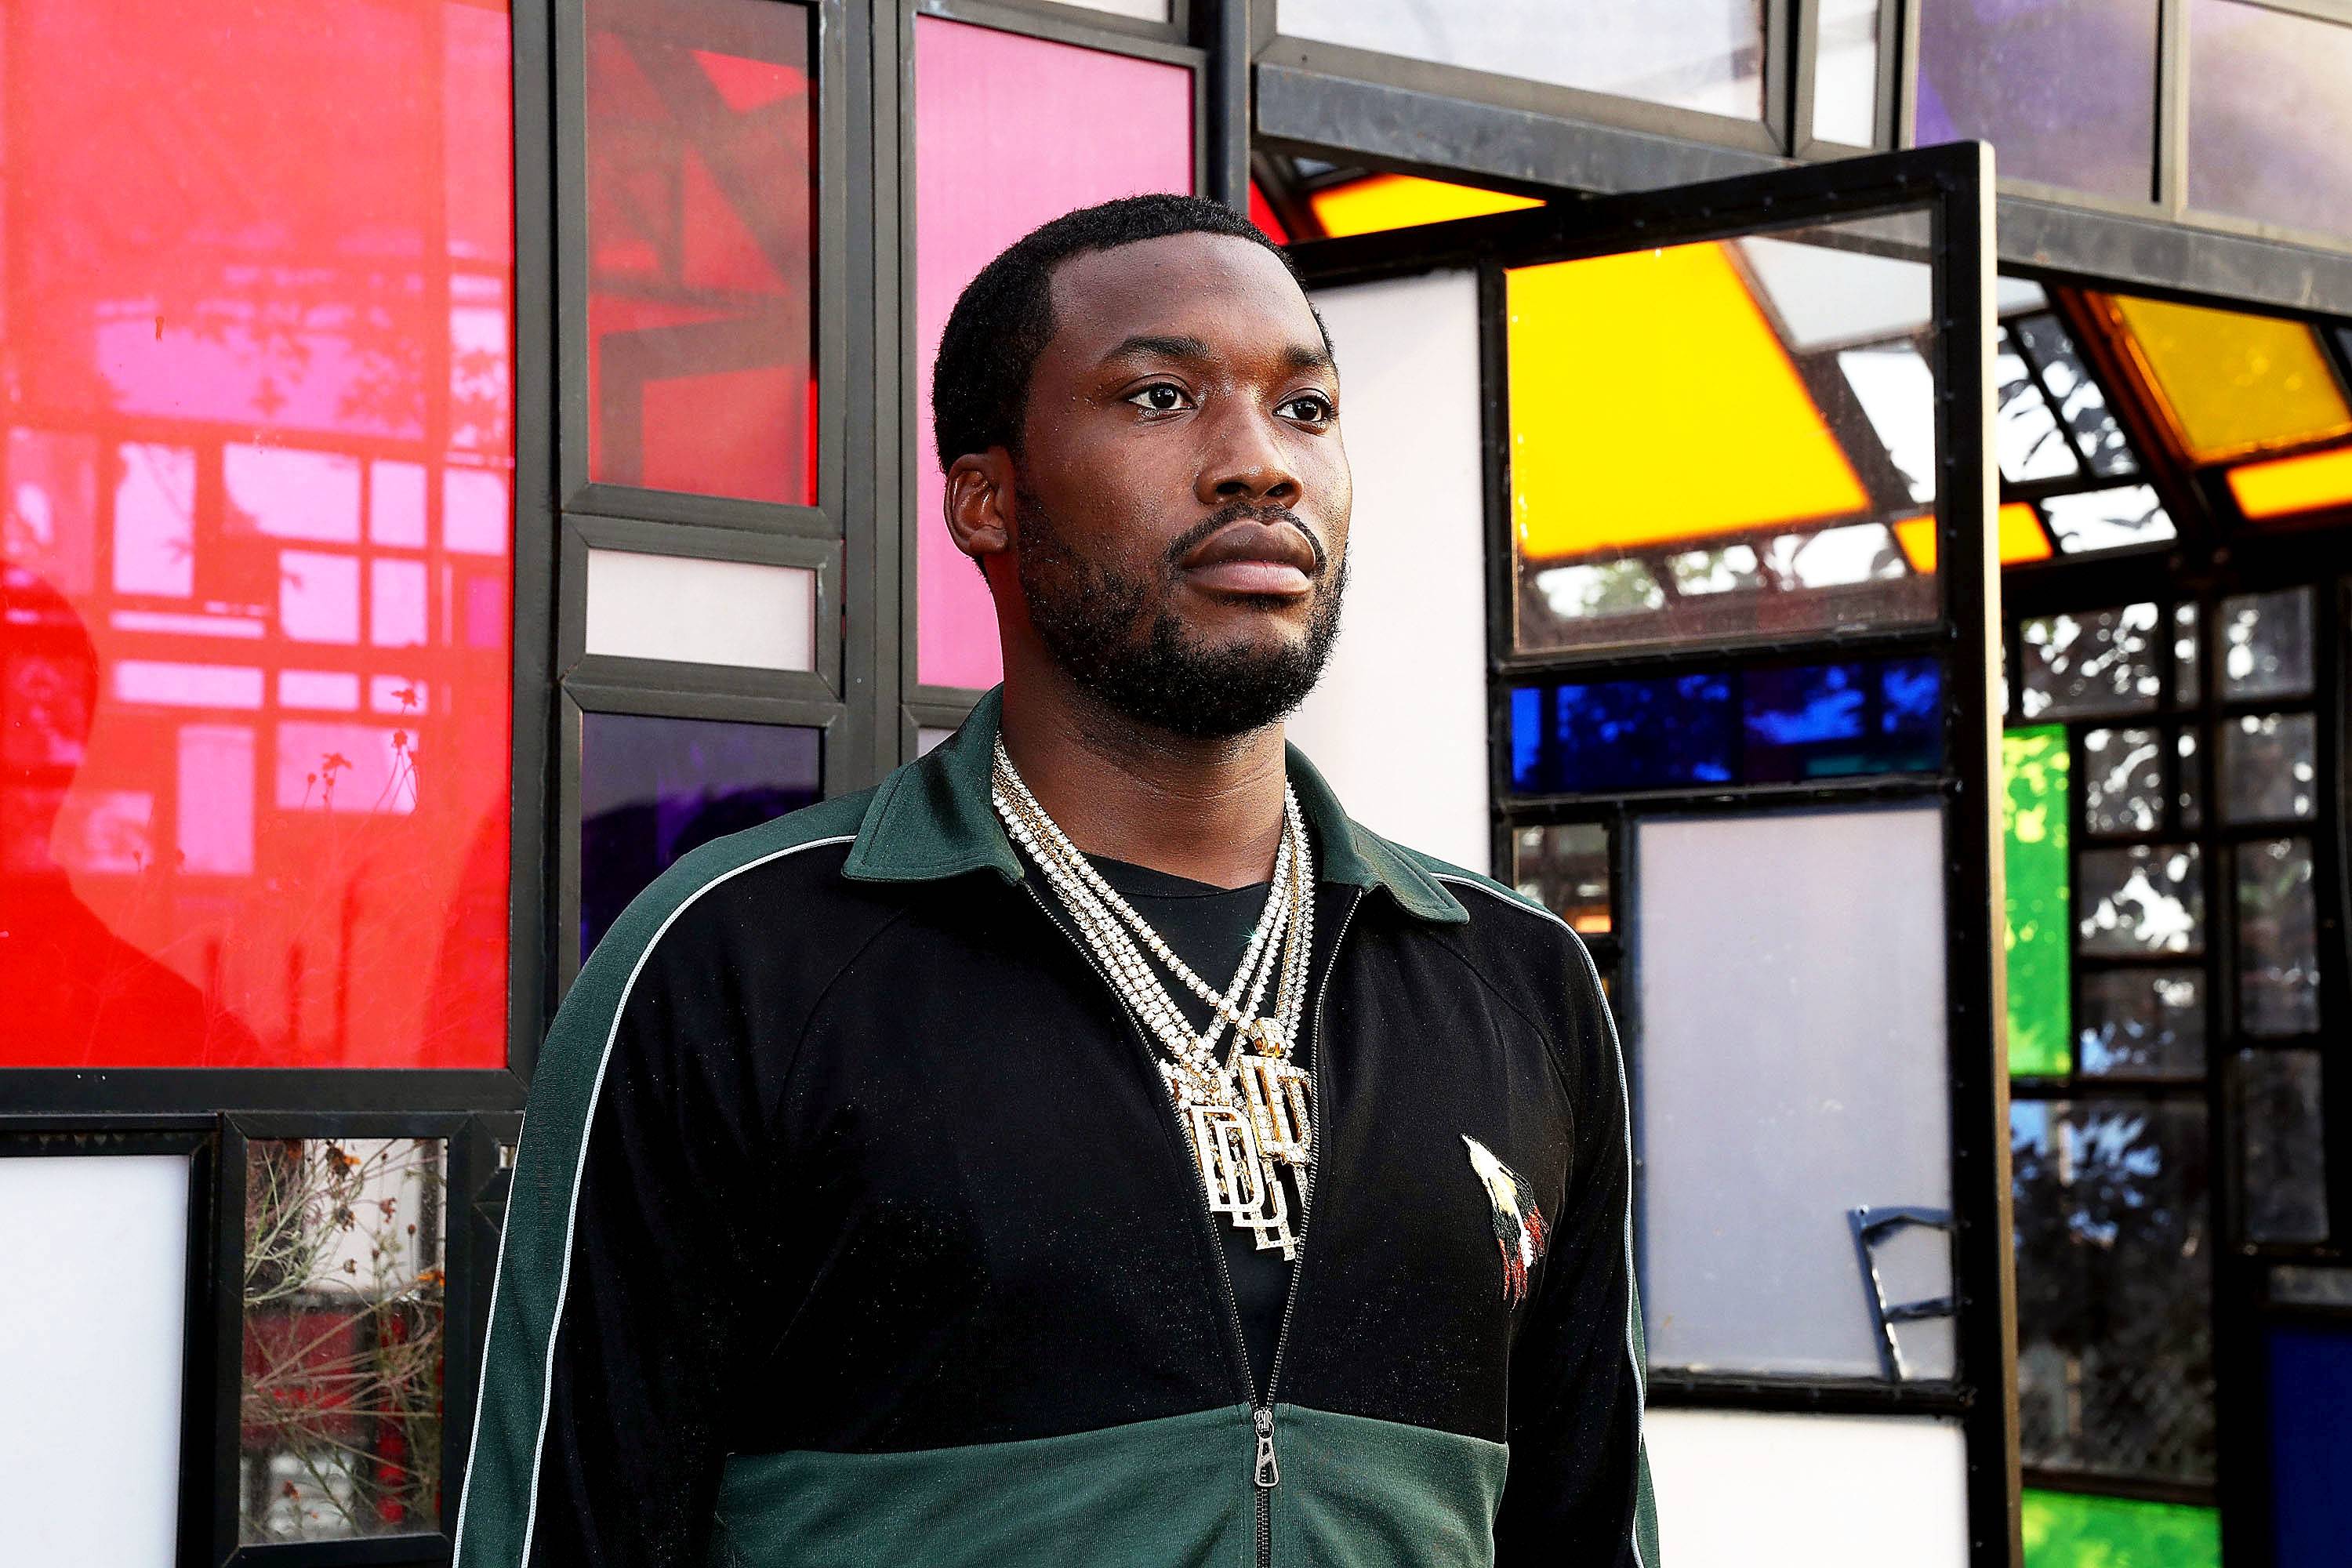 Judge That Sentenced Meek Mill To Prison Faces New Allegations Of ...